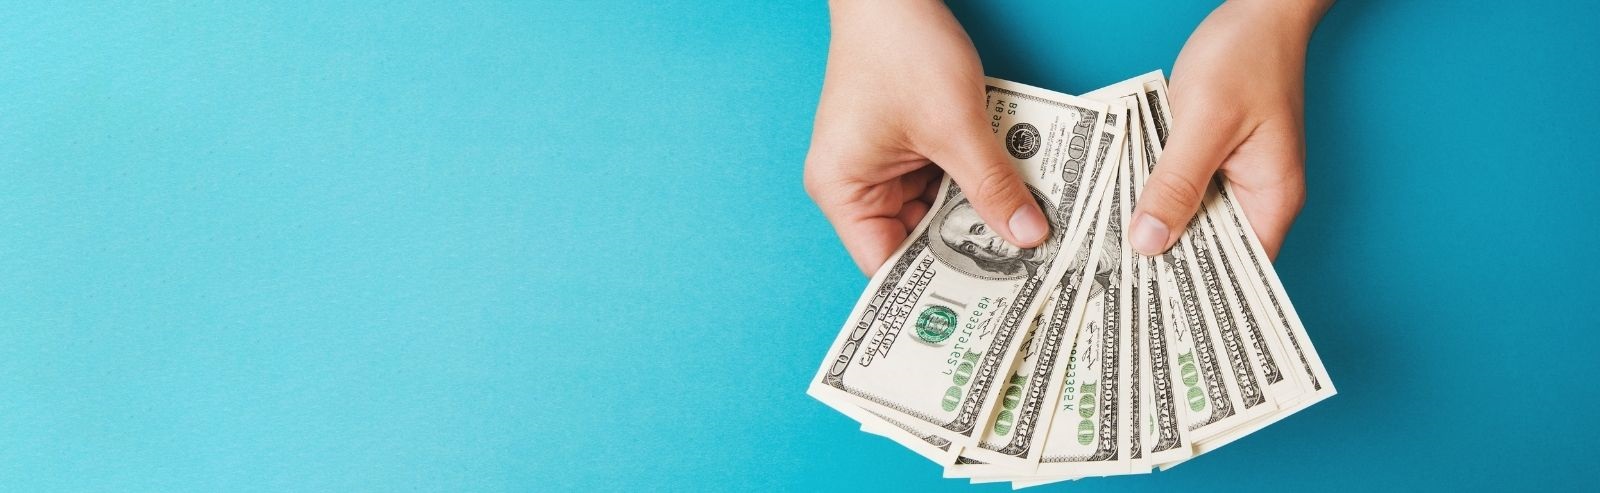 hands holding money with blue background